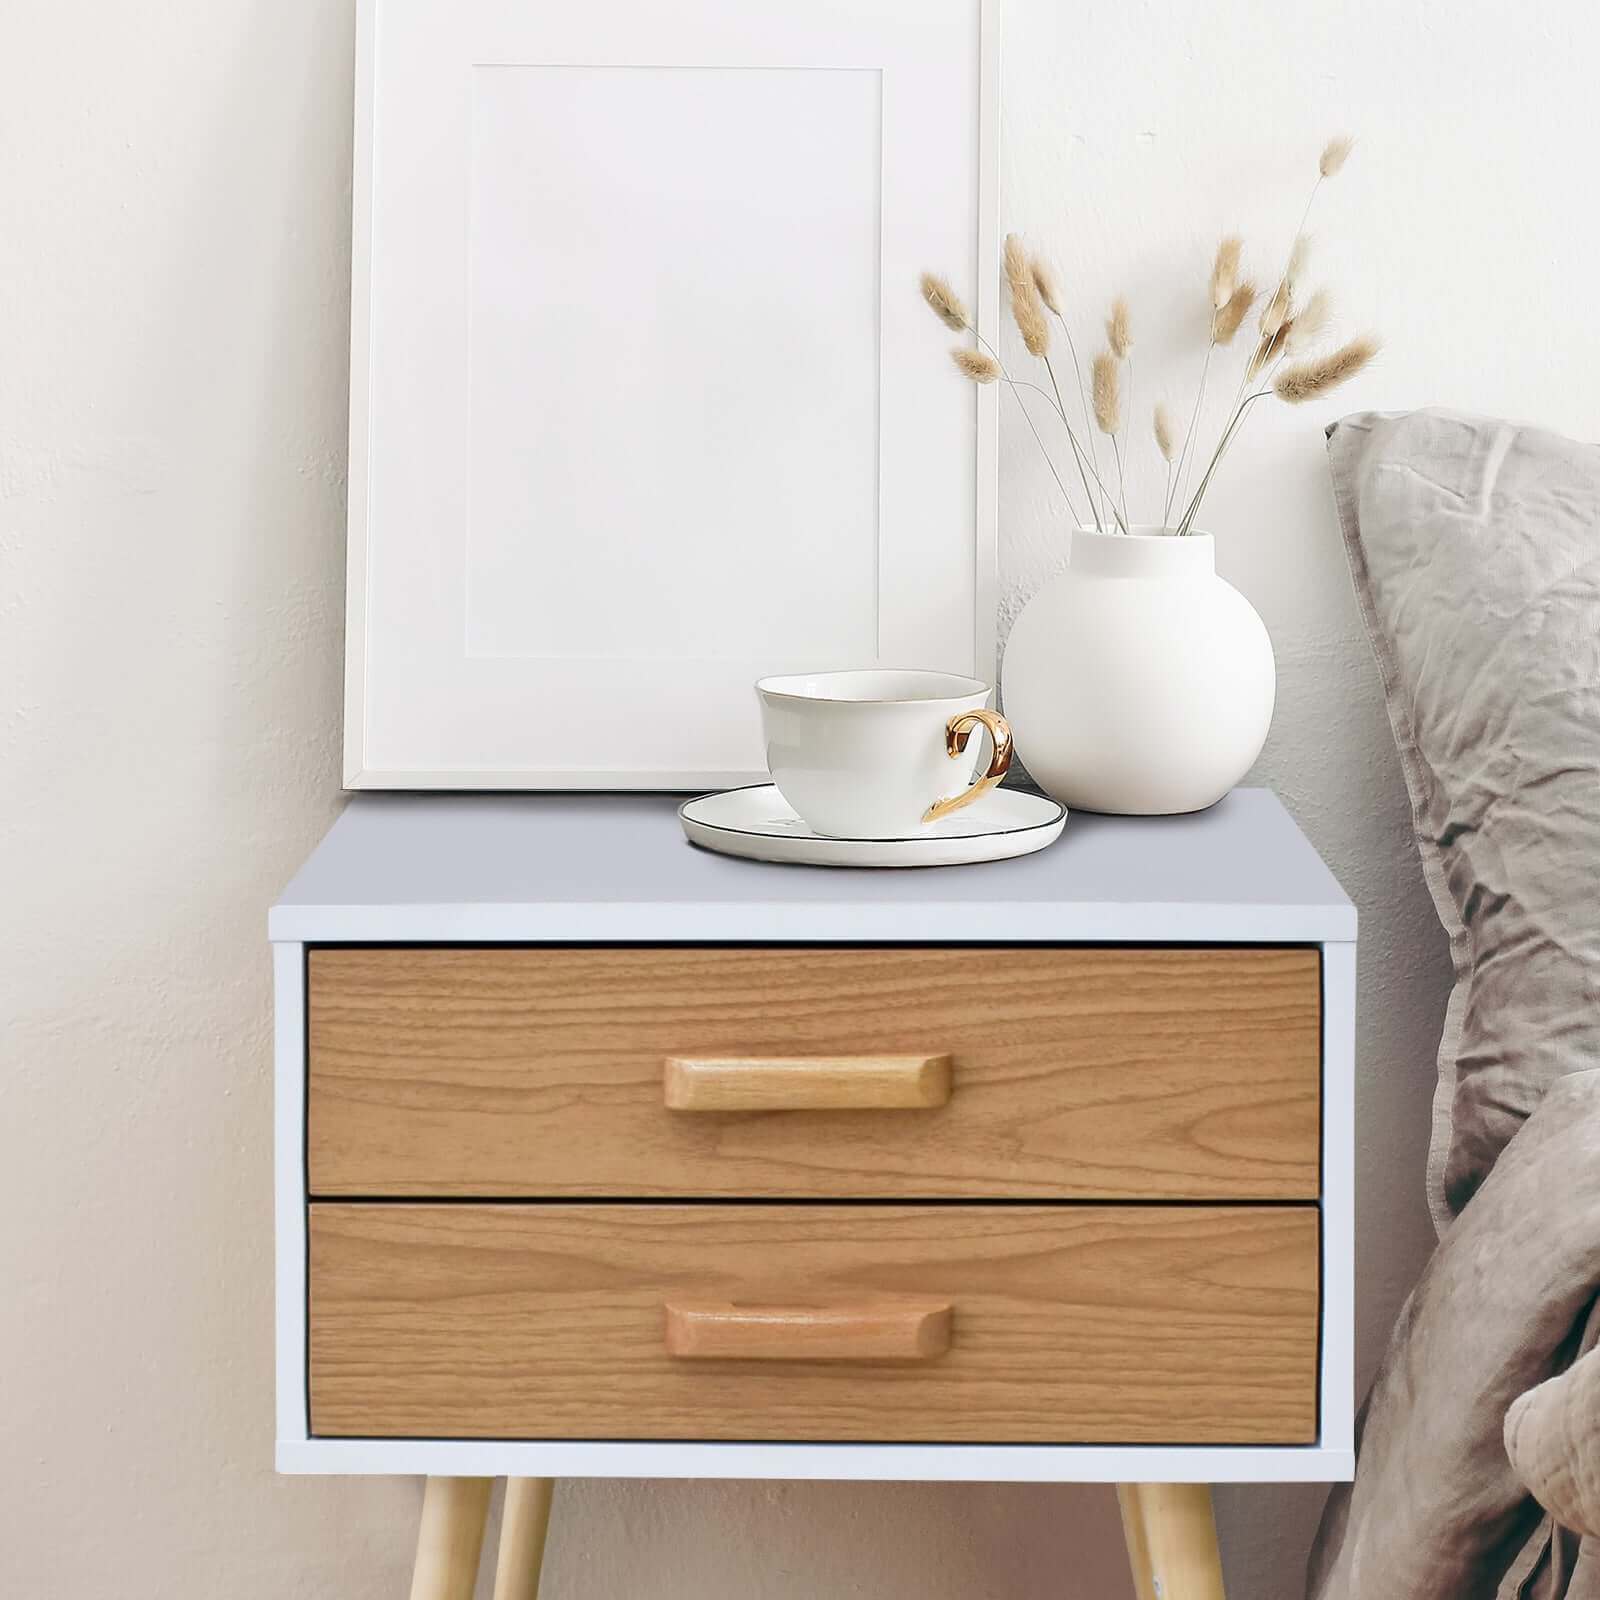 Milano Decor Bedside Table Bronte Drawers Nightstand Unit Cabinet Storage-Upinteriors